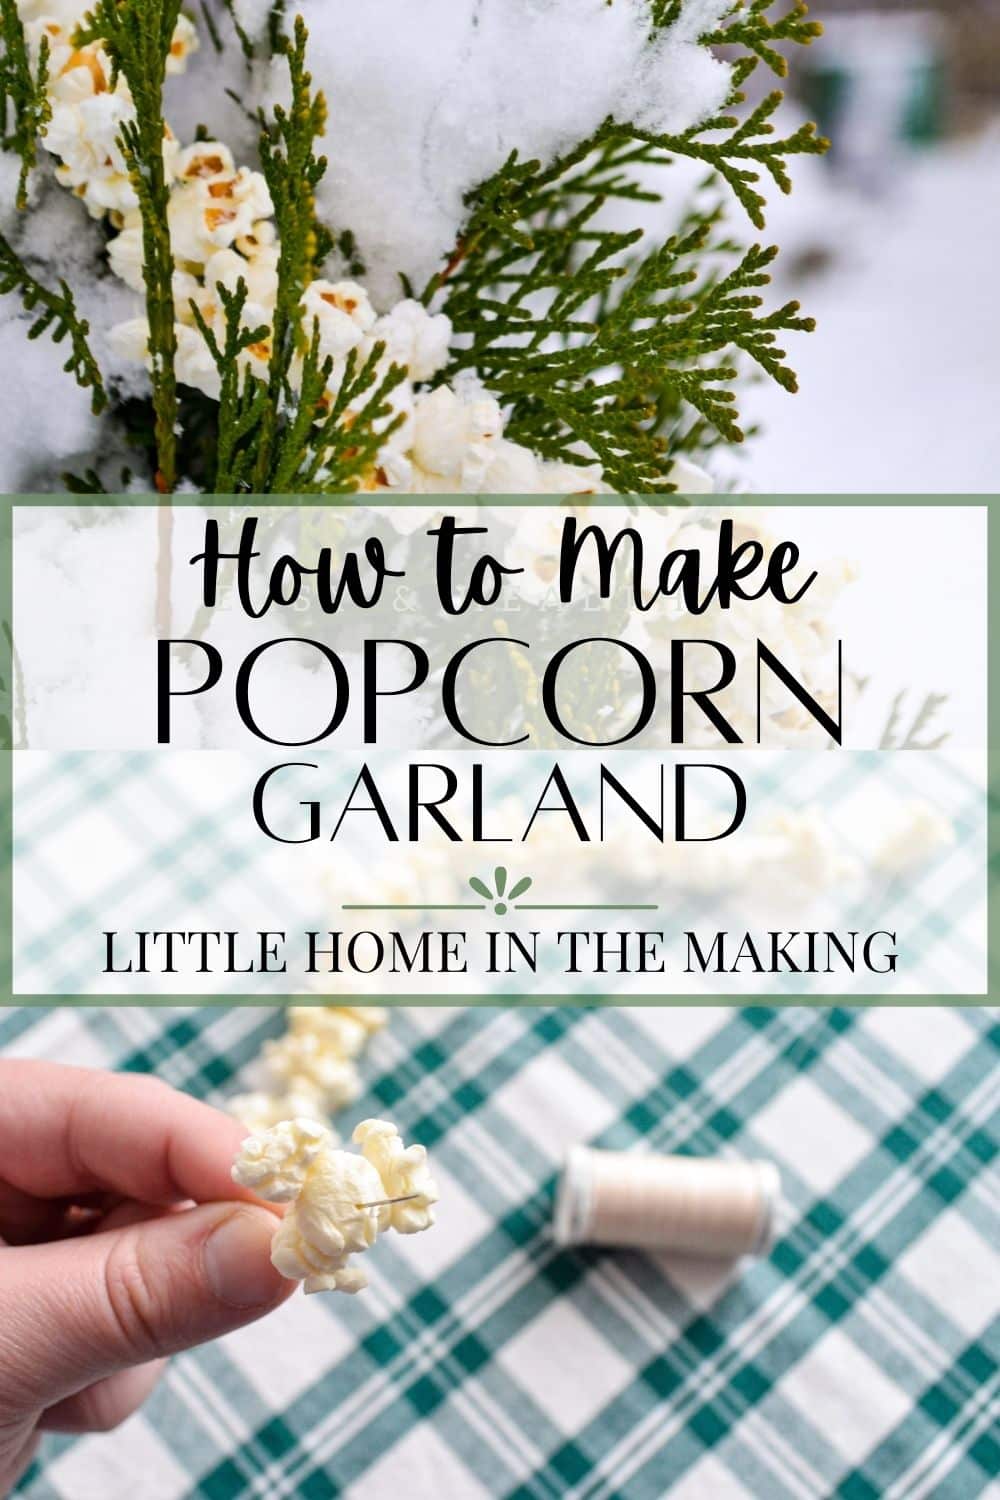 How to make popcorn garland for a Christmas tree